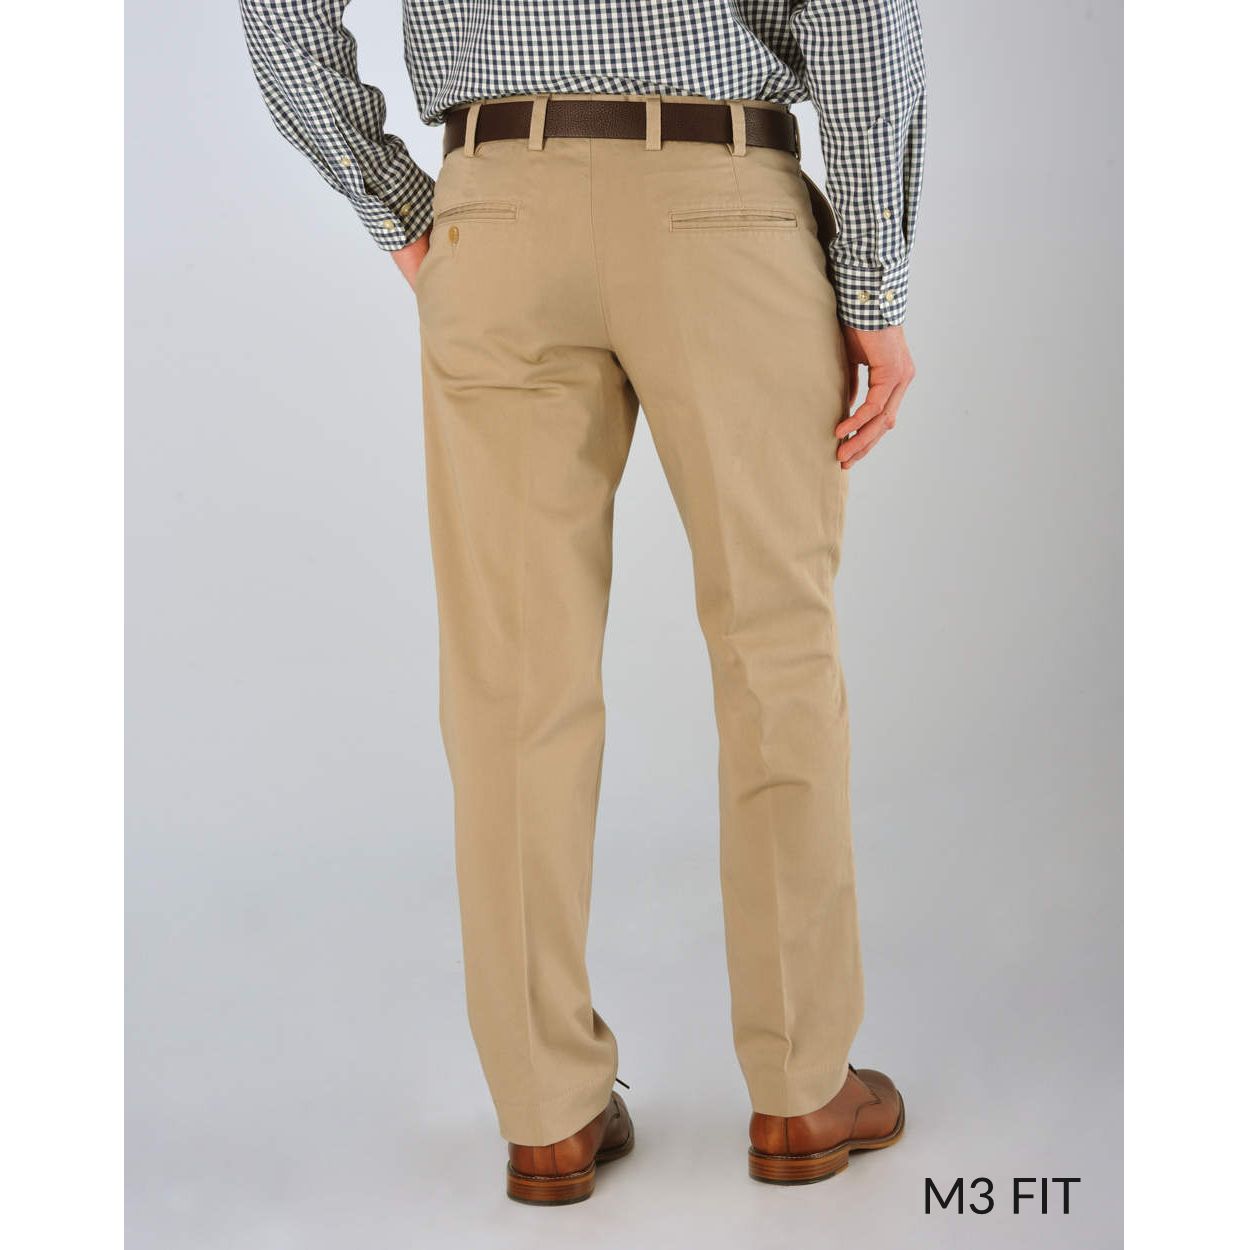 M3 Straight Fit Vintage Twills in Olive by Bills Khakis